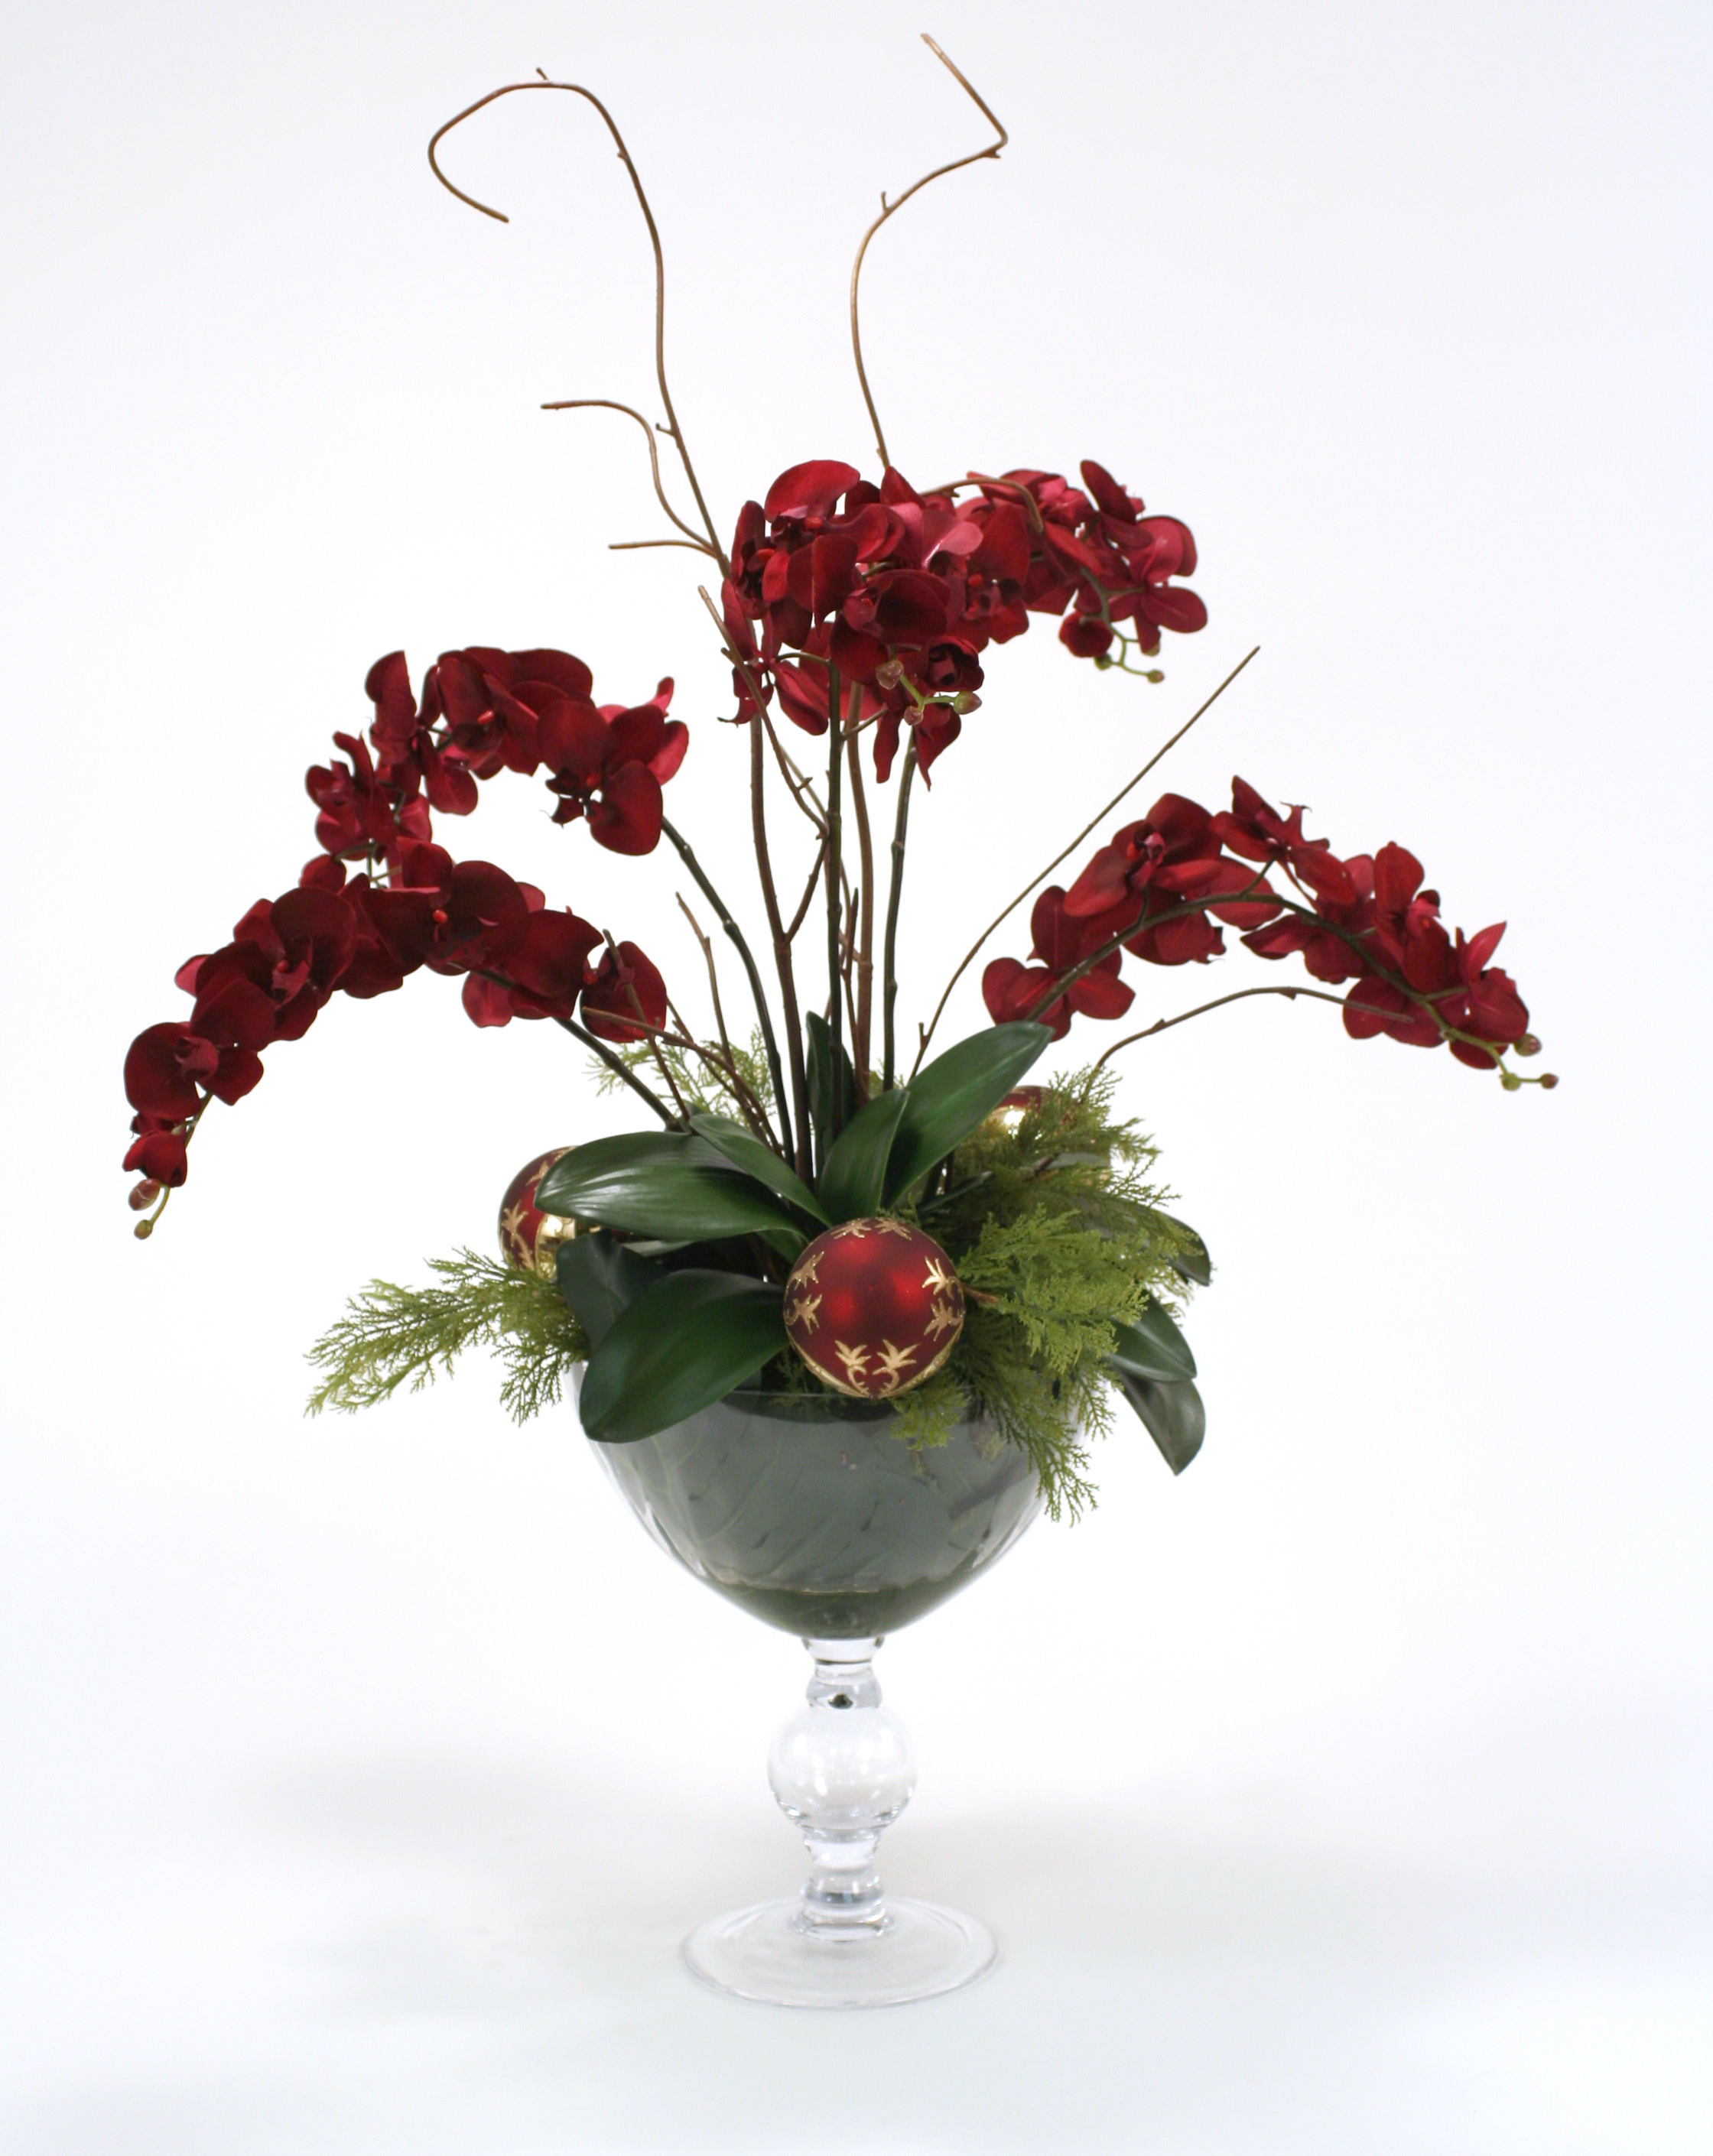 Velvet Phalaenopsis Orchids with Cedar and Ornaments in Glass Compote